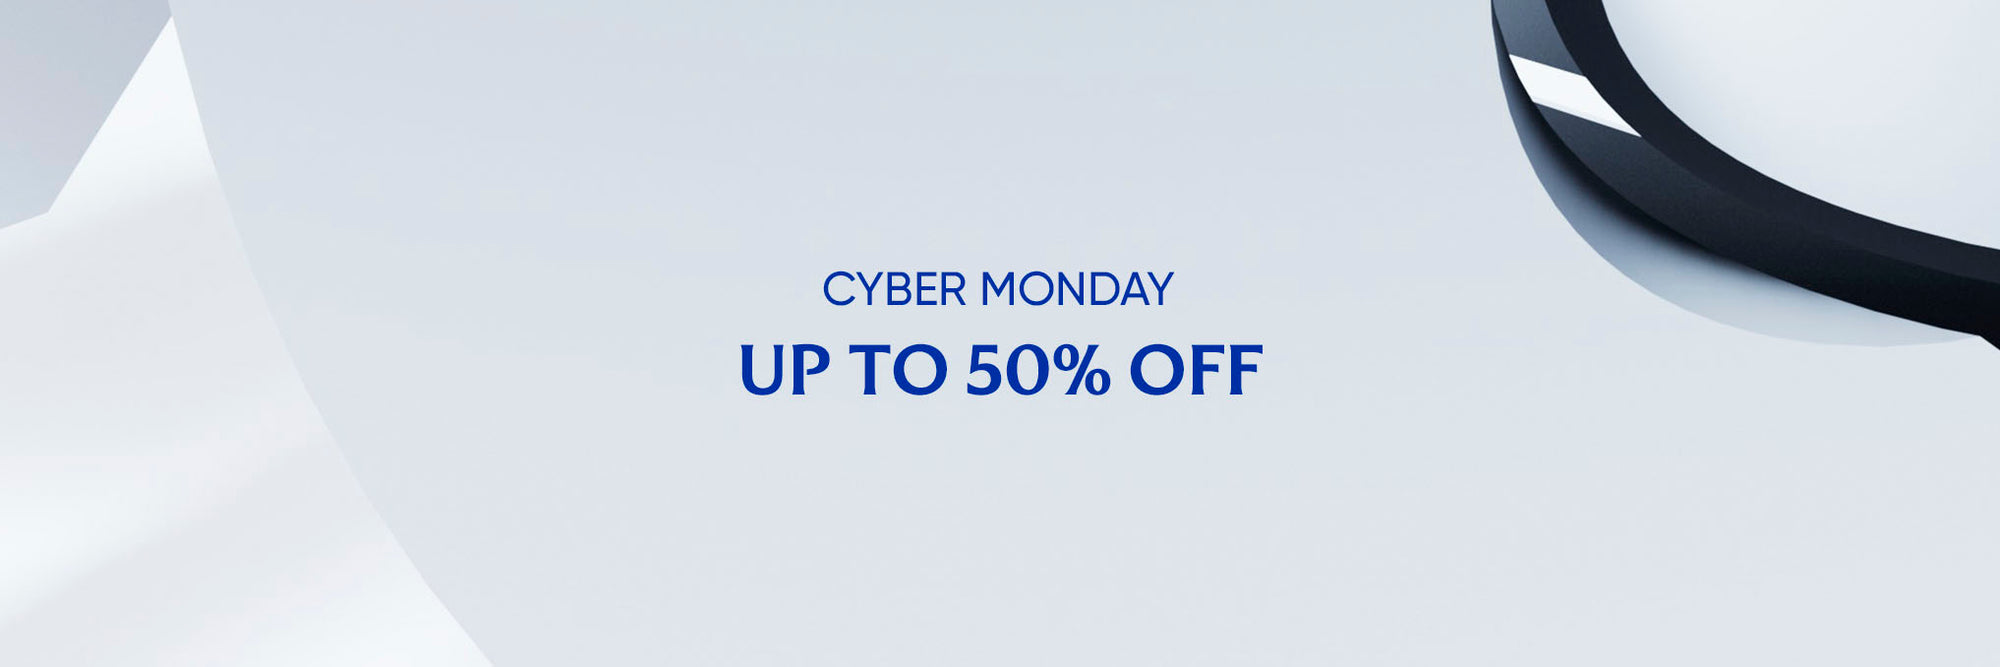 23/24 Cyber Monday - Special Offers